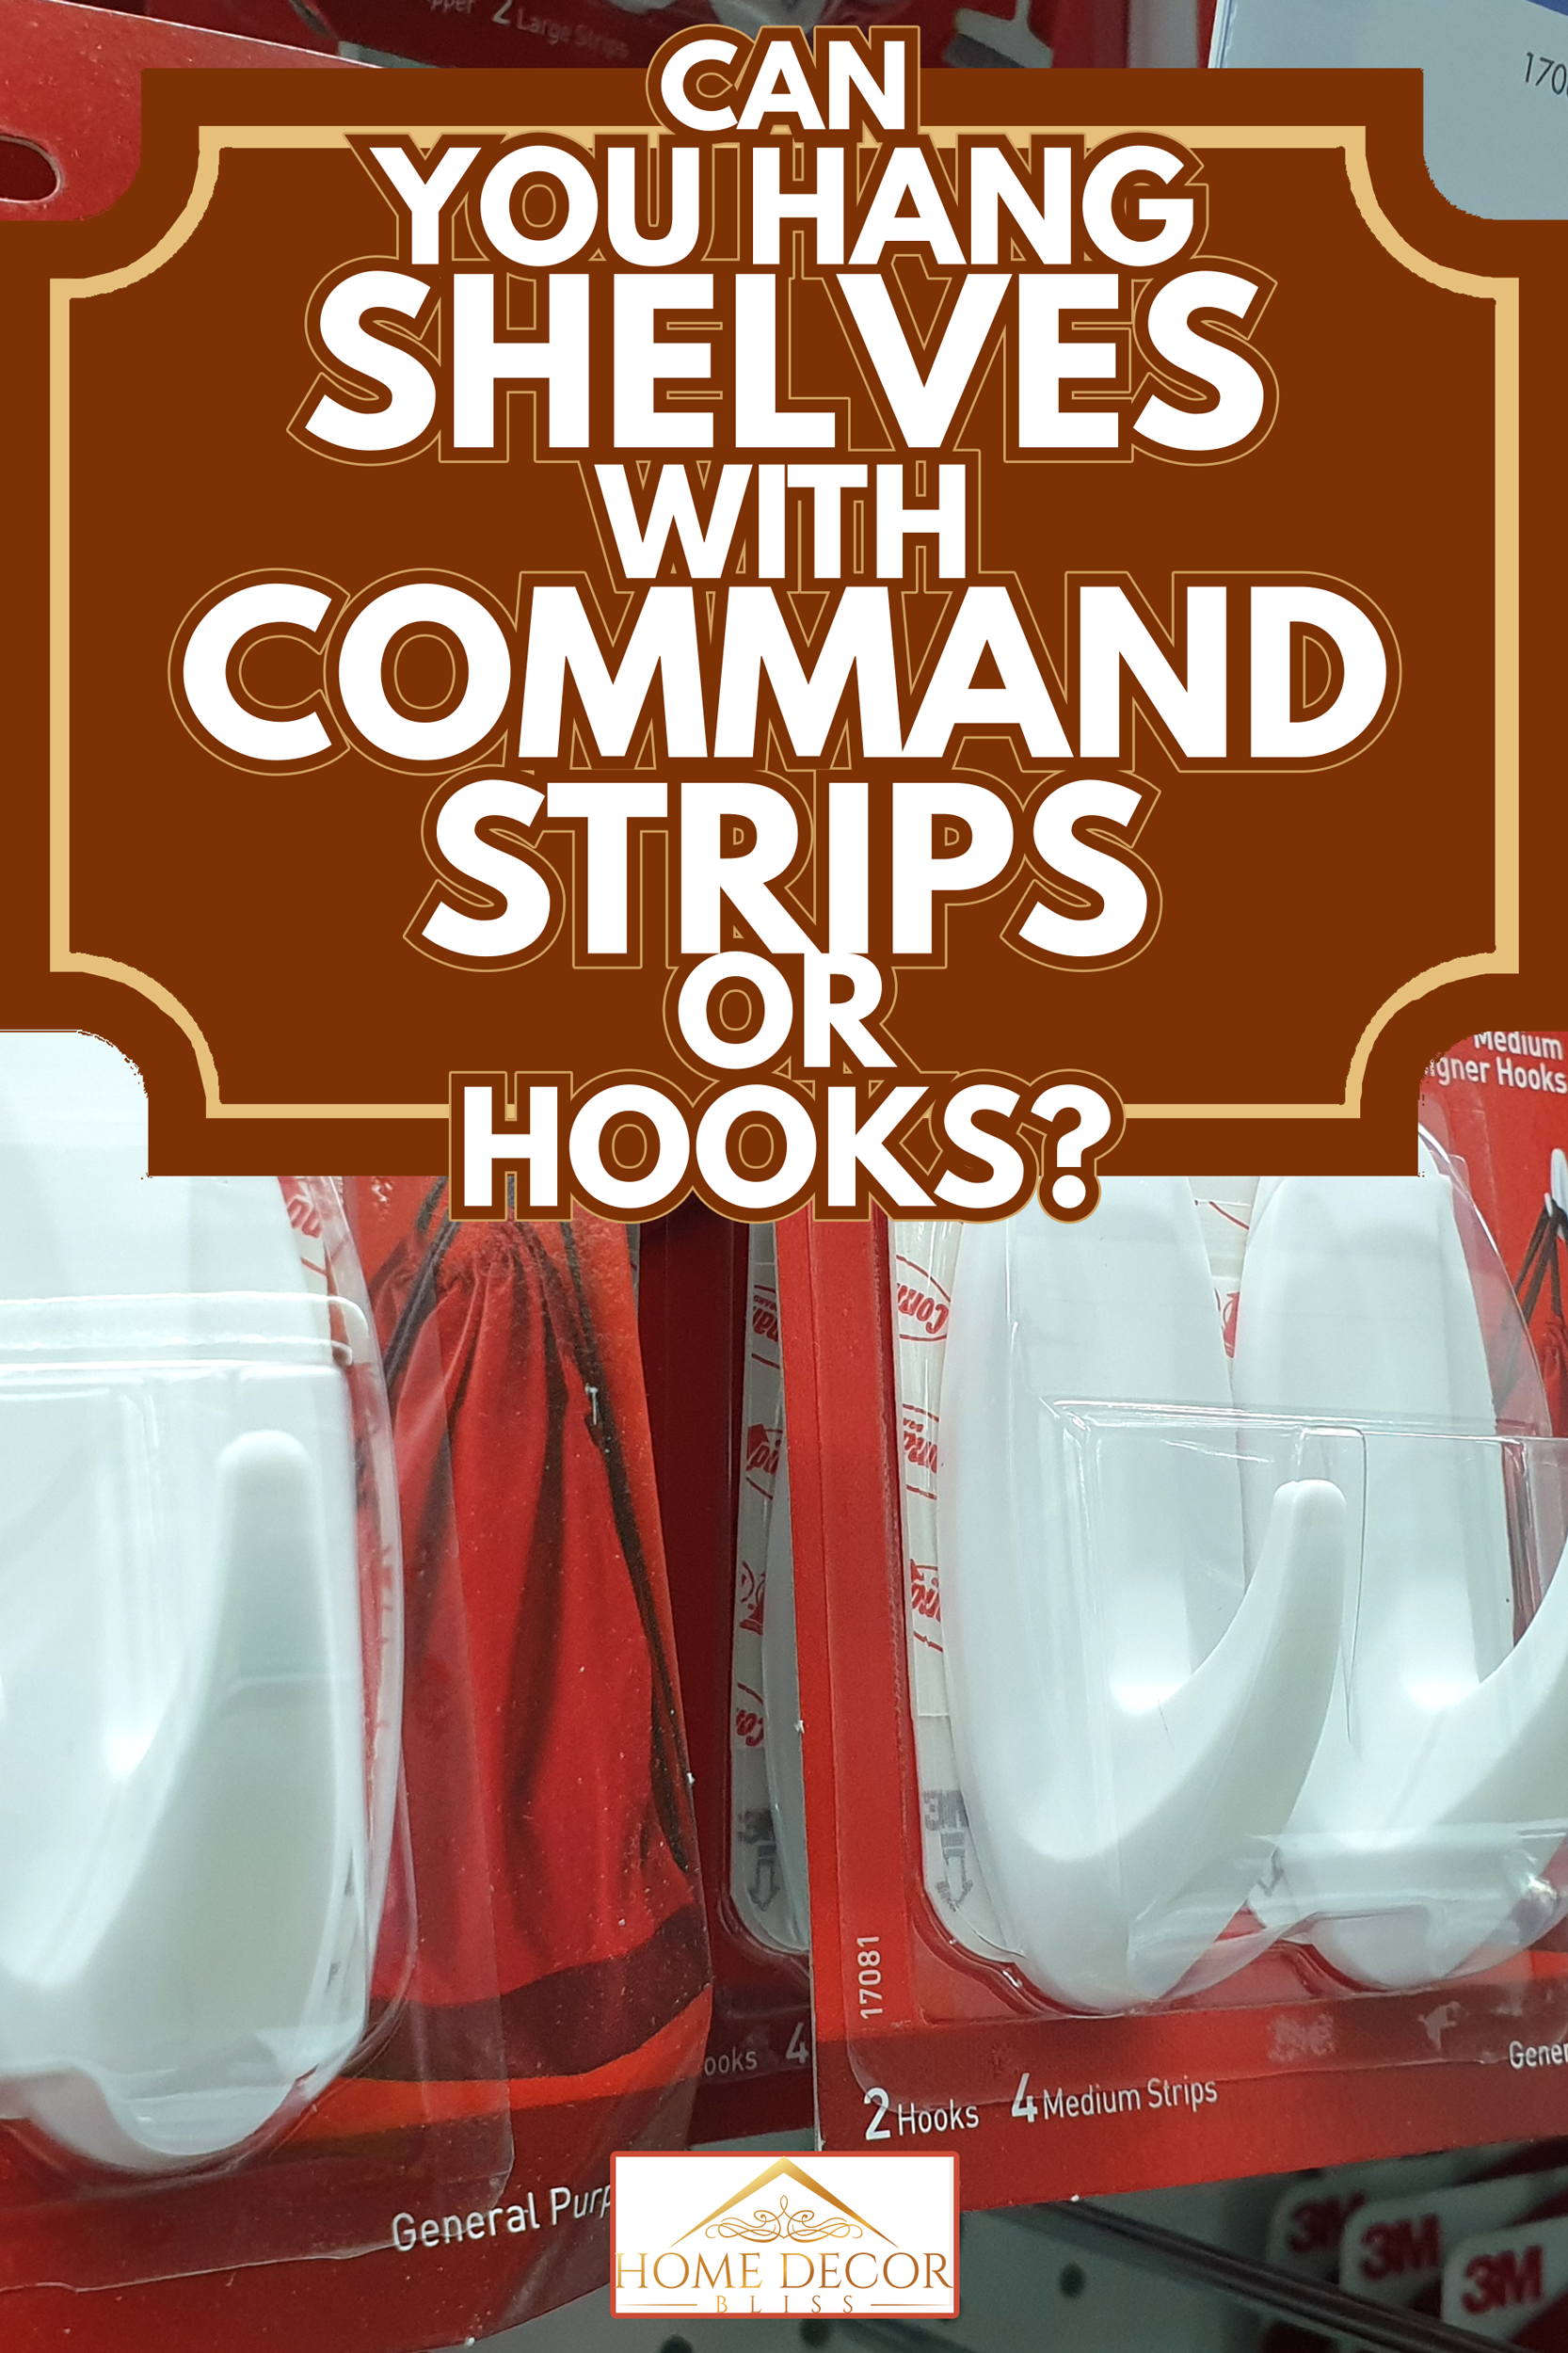 Command brand Picture Hanging Strips and Hooks by 3M company on store shelf, Can You Hang Shelves With Command Strips Or Hooks?